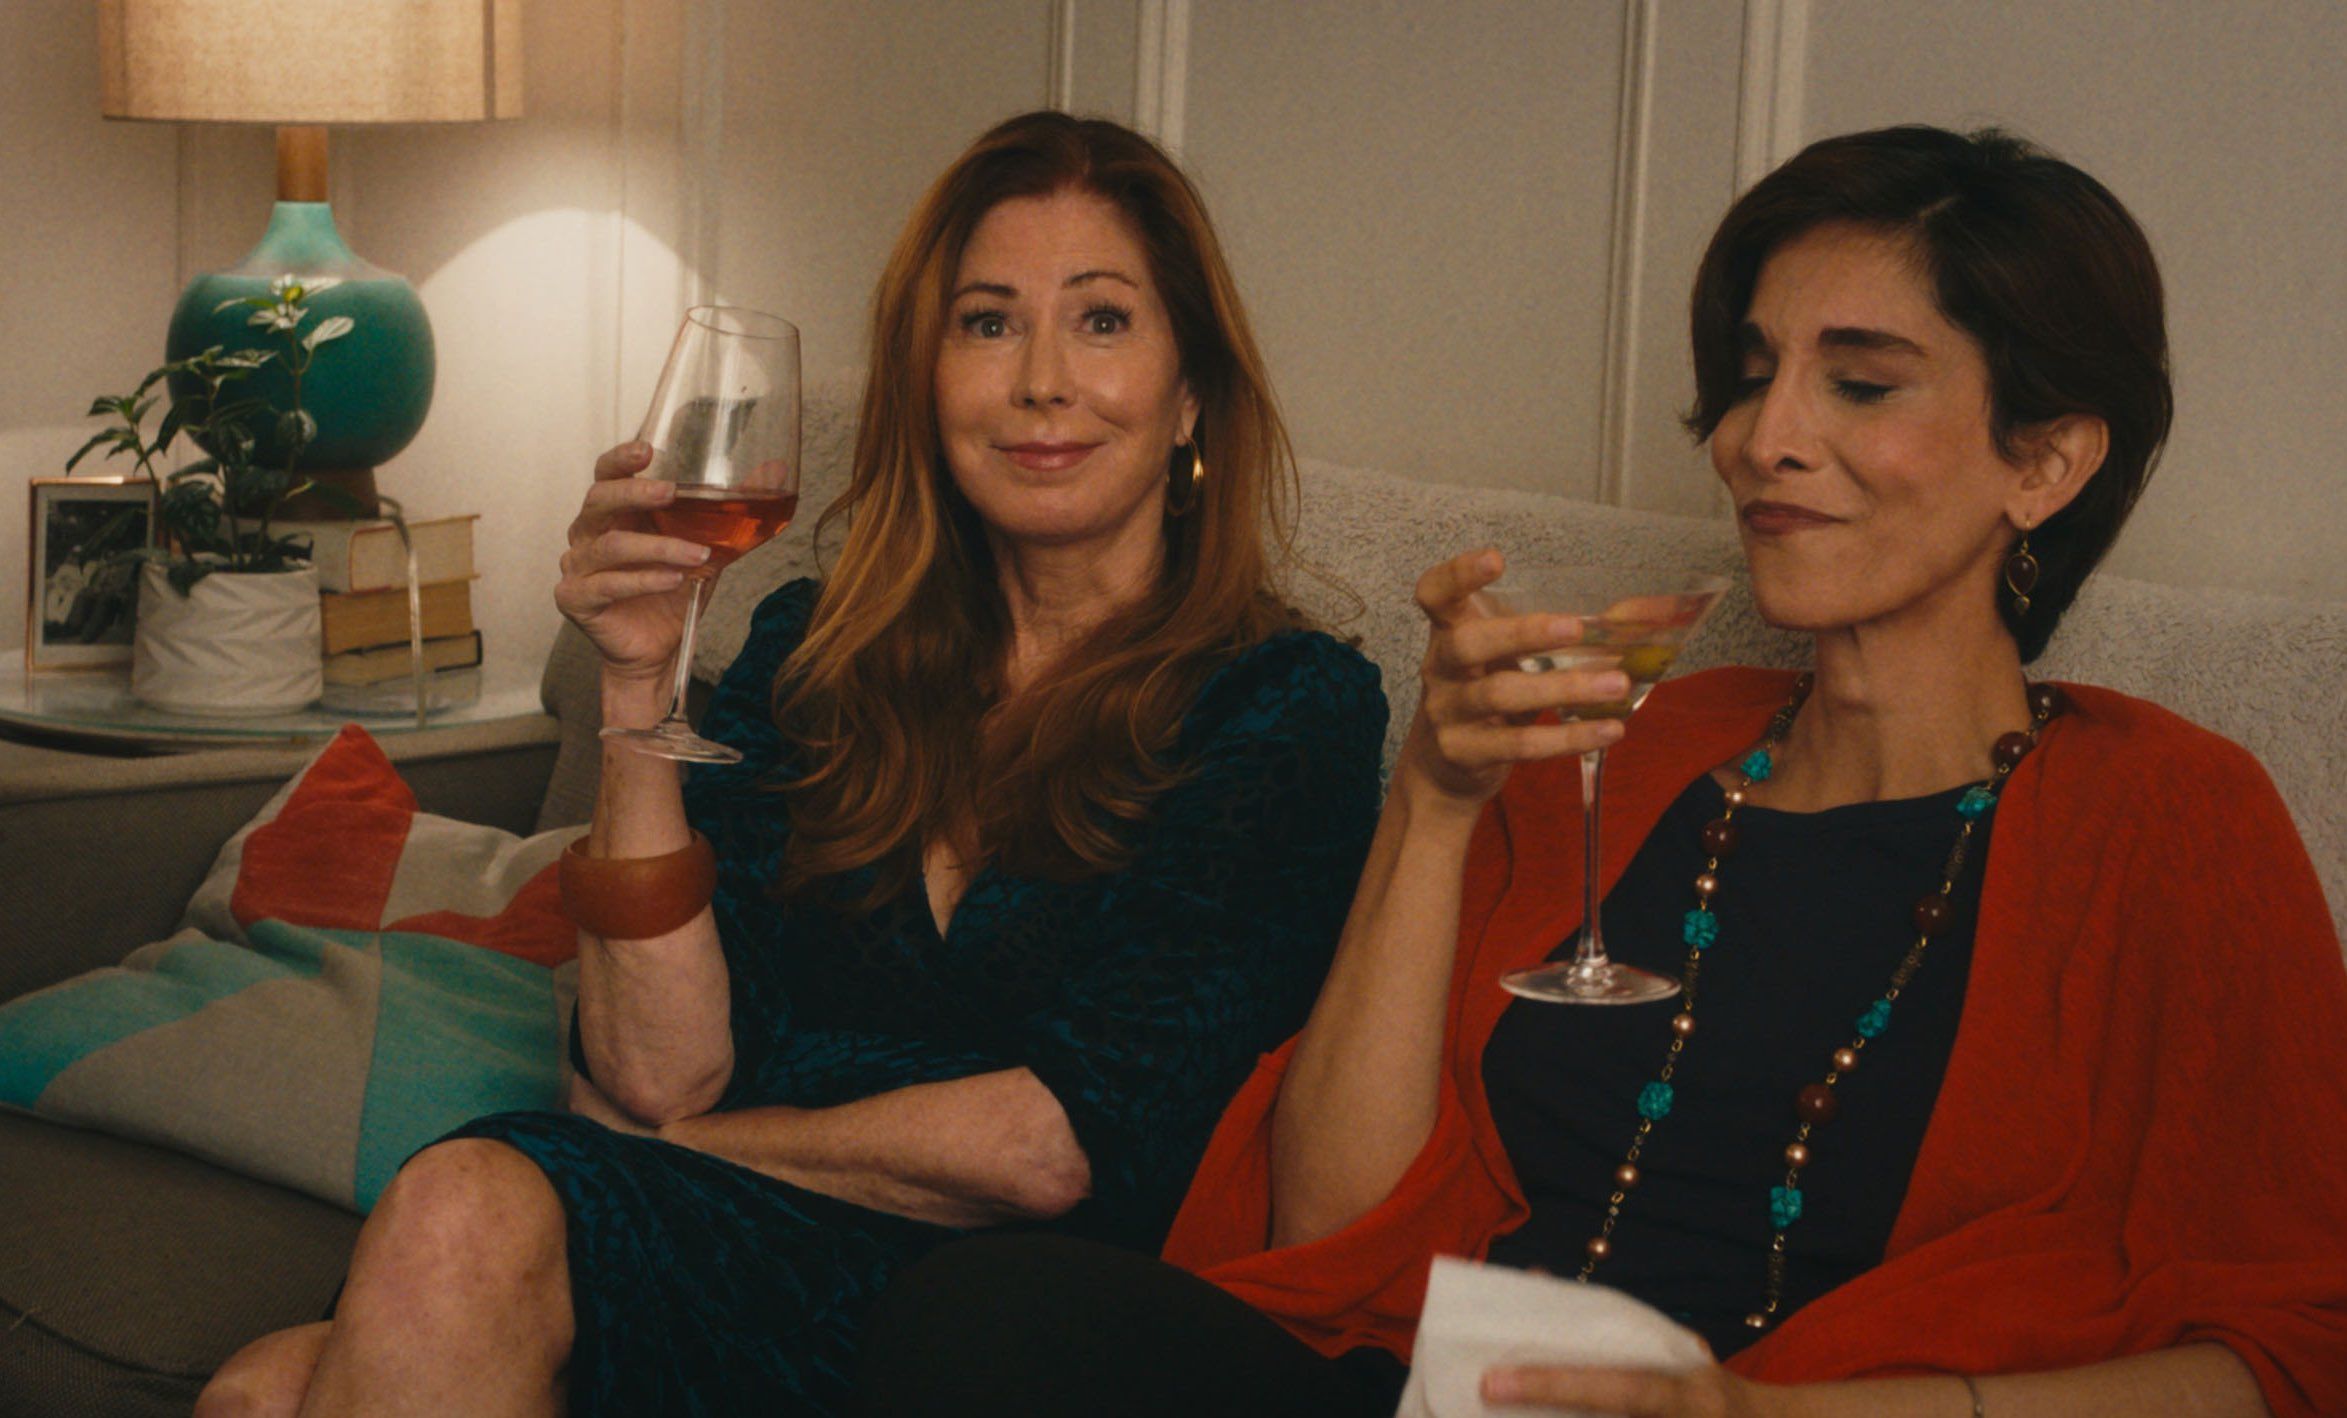 Dana Delany and Pooya Mohseni enjoy some wine and the sounds of lovemaking in Troy / Photo courtesy of Sundance Institute